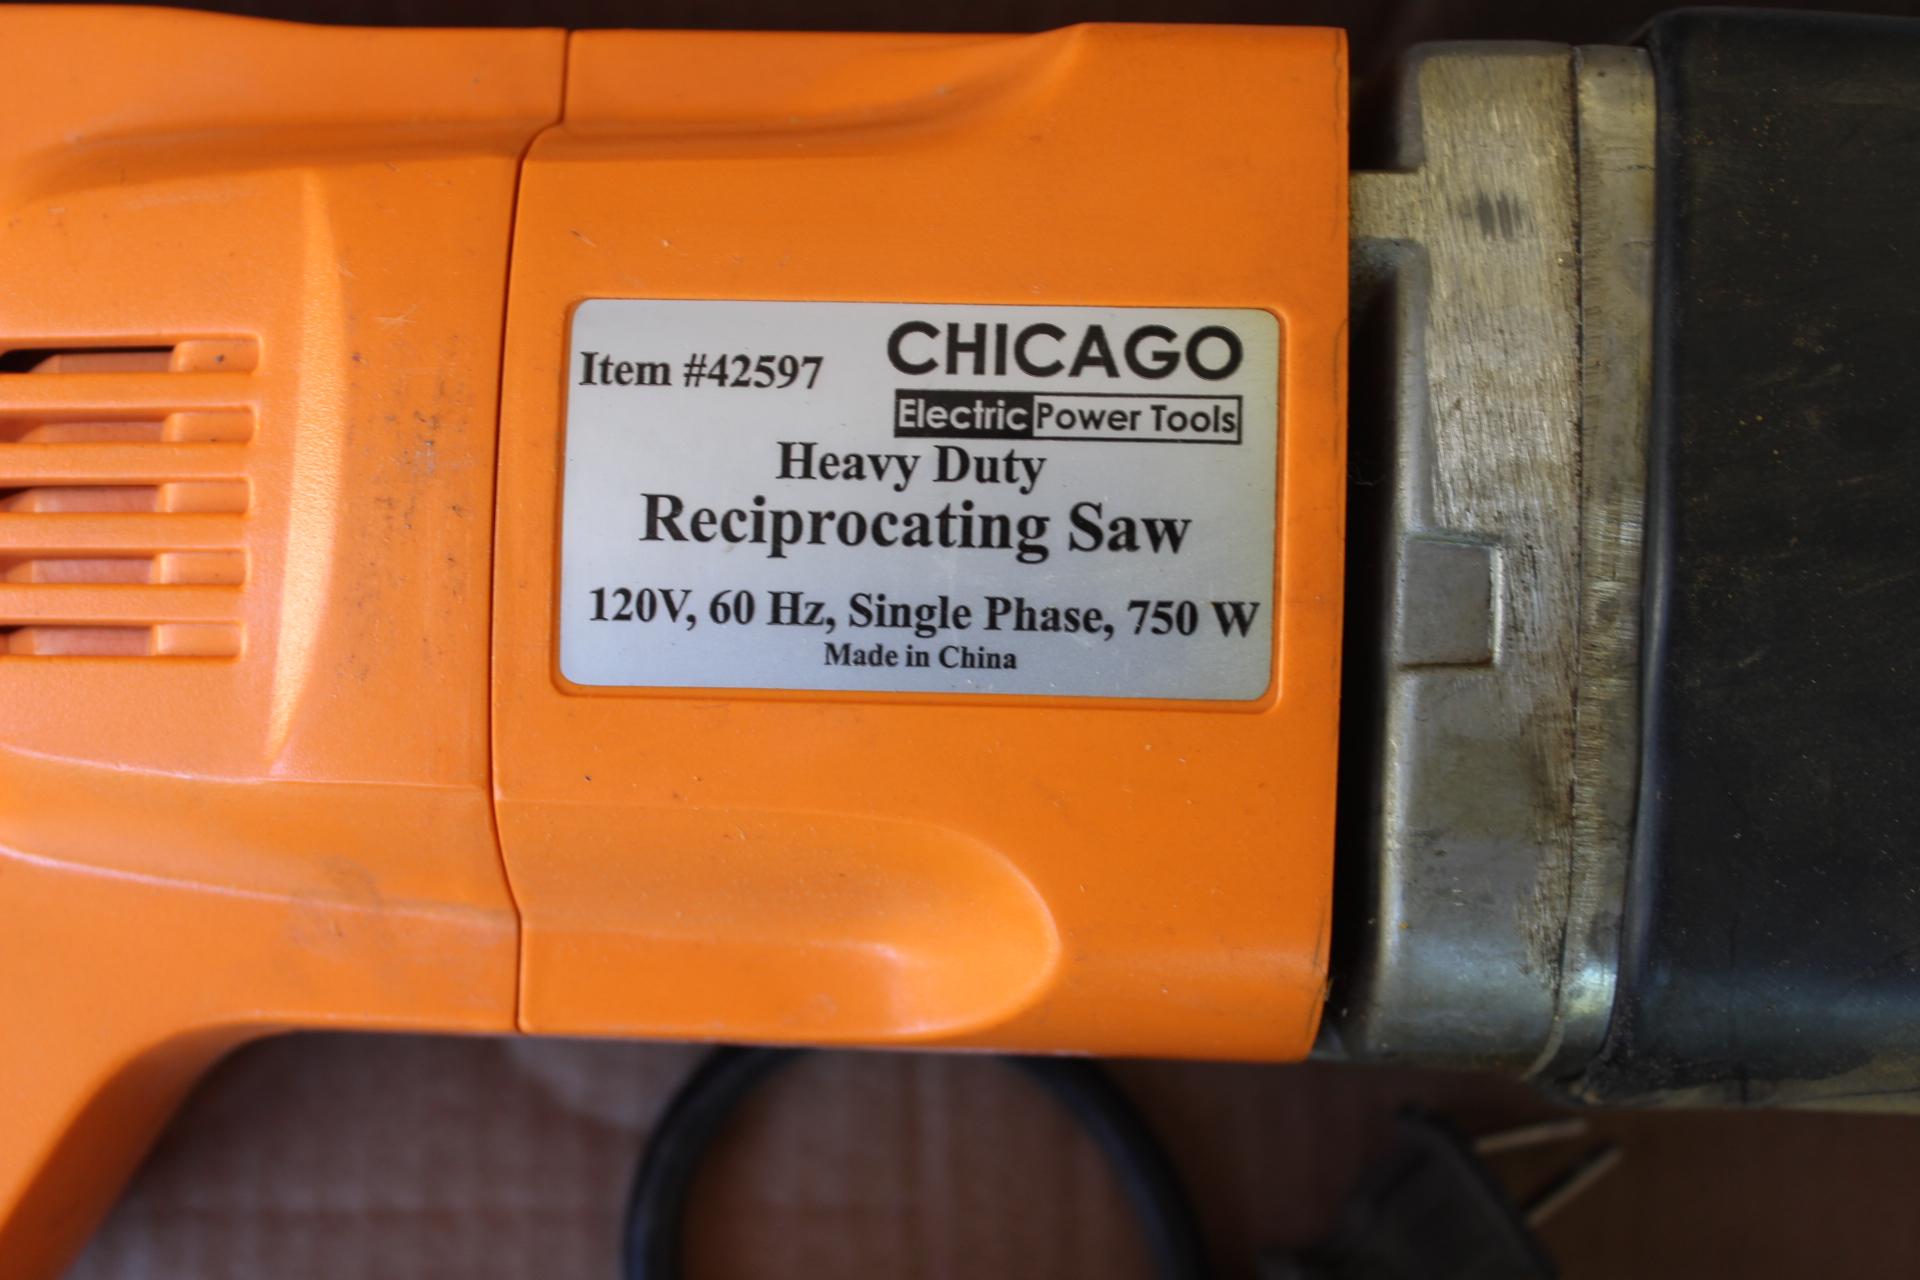 Chicago Electric Power Tools Heavy Duty Reciprocating Saw, Chicago 3/8" Close Quarter Drill